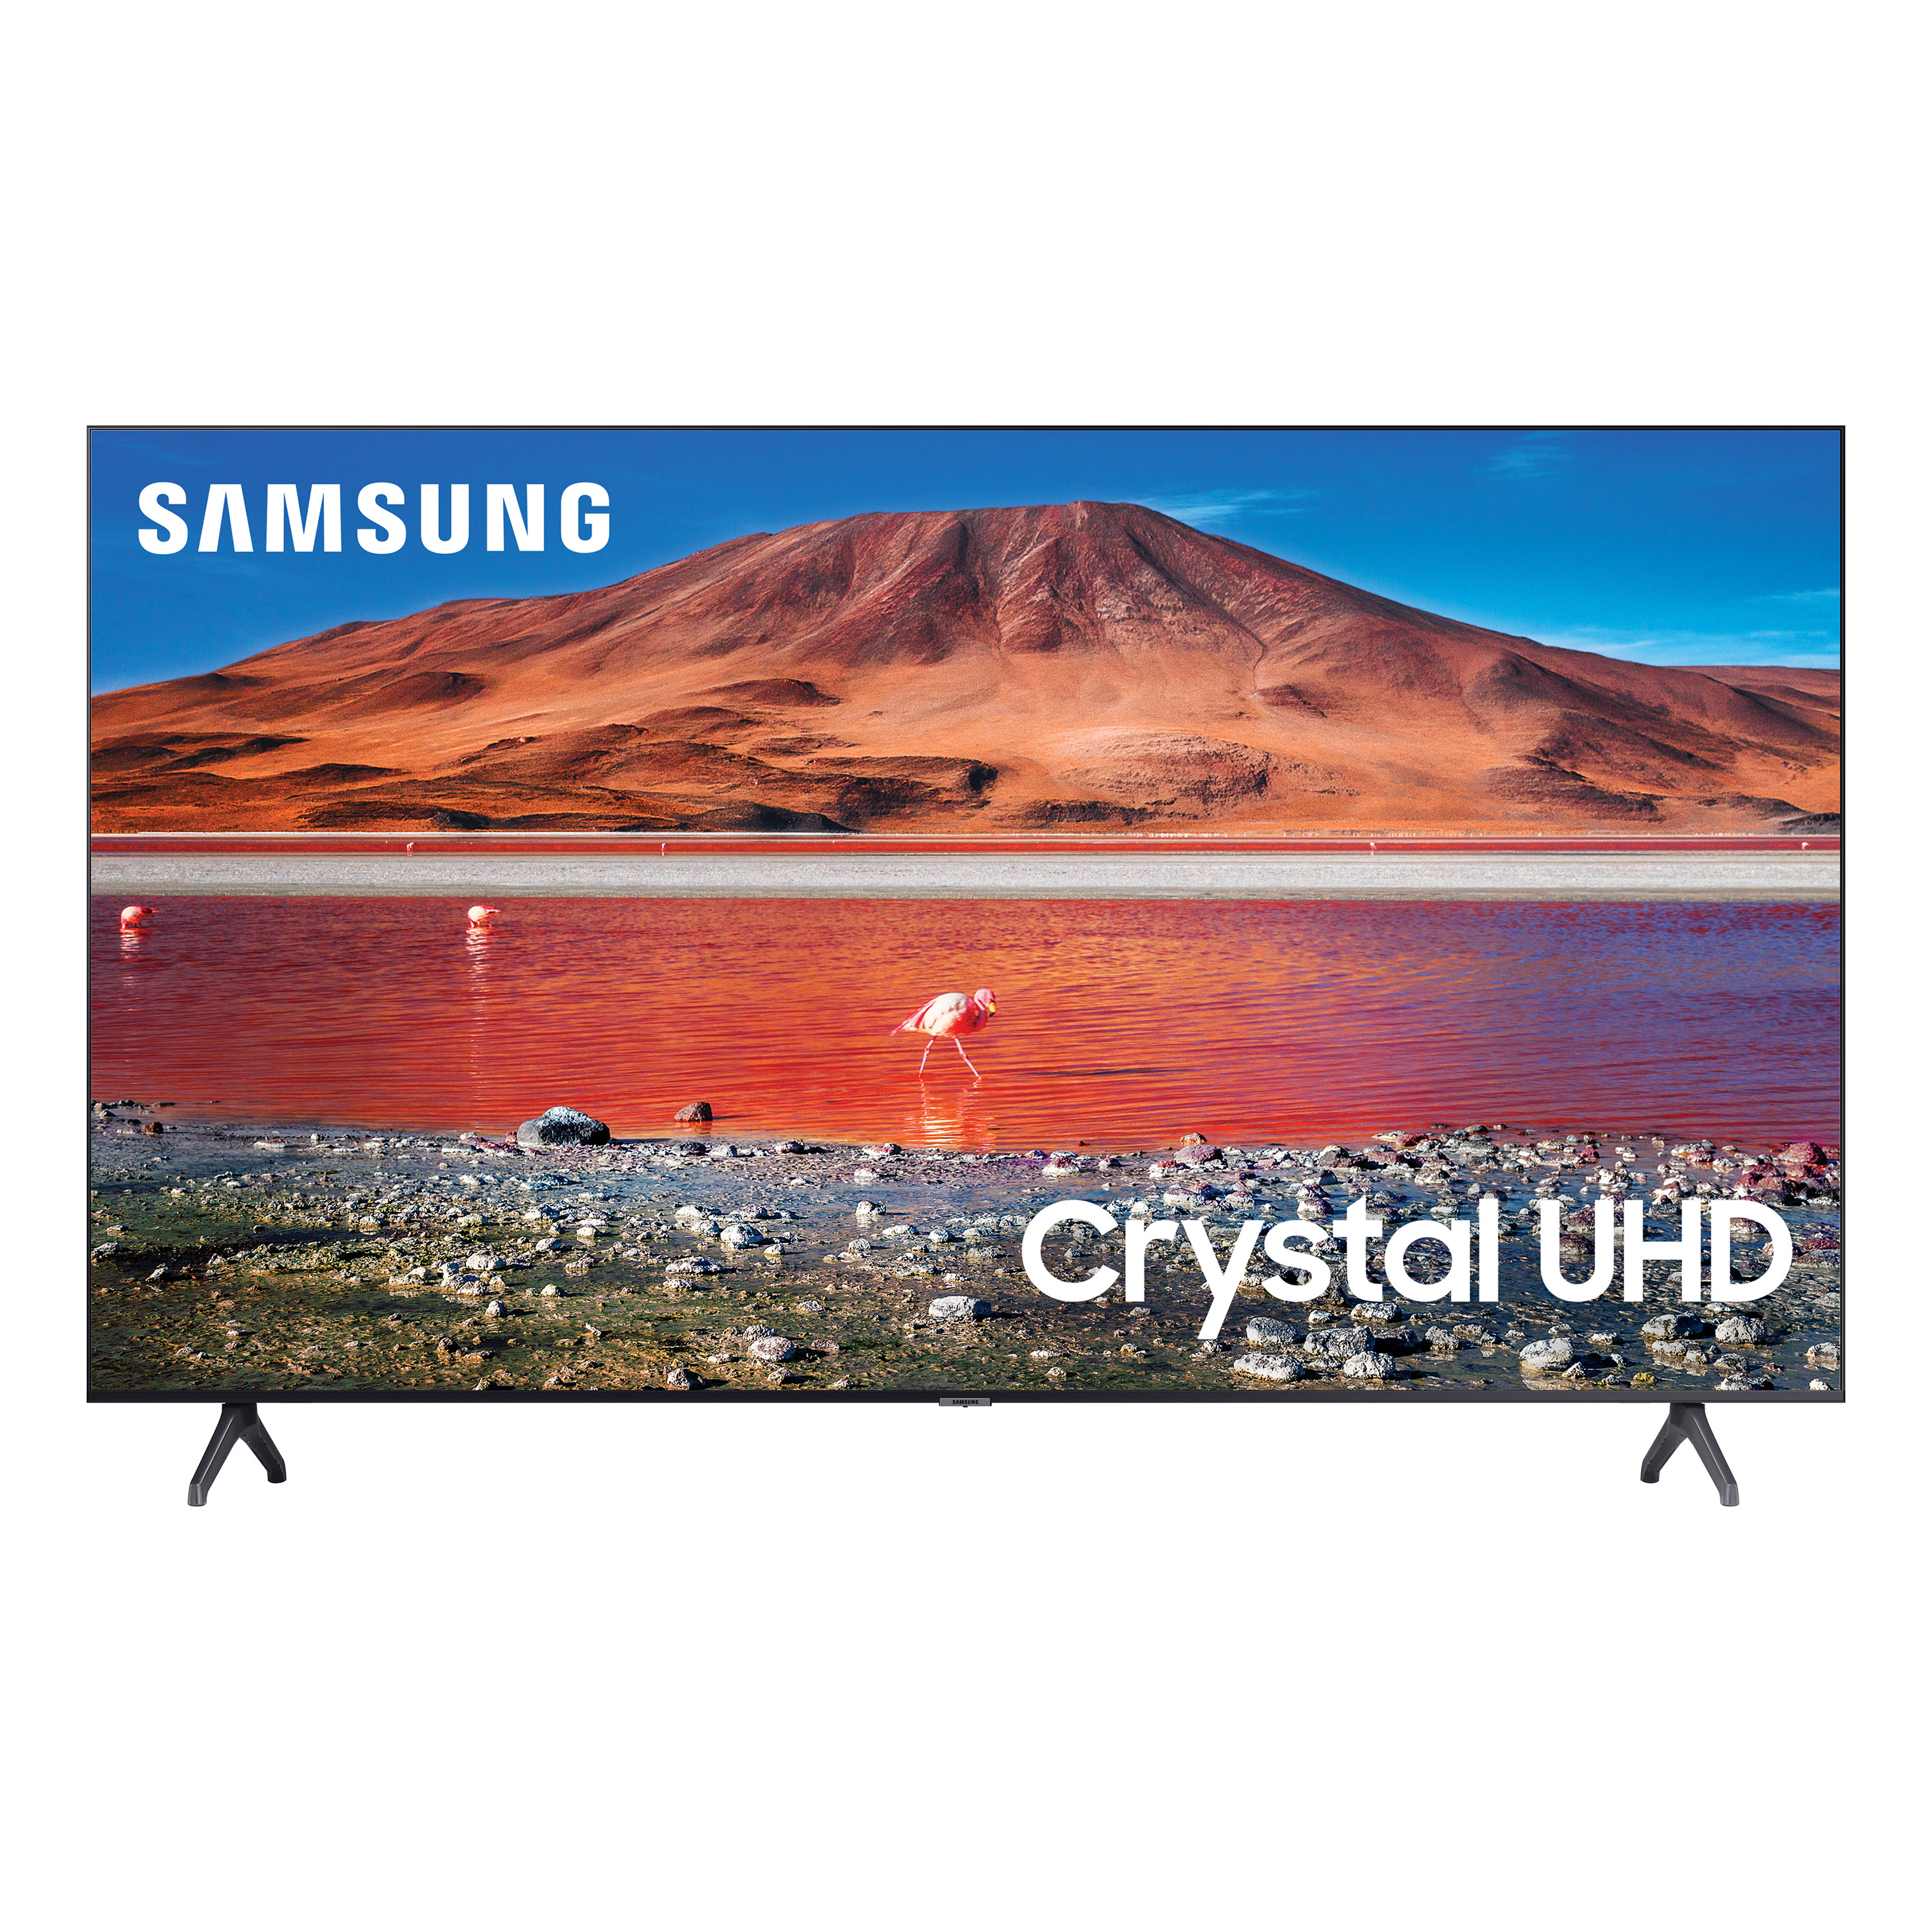 SAMSUNG 70" Class 4K Crystal UHD (2160P) LED Smart TV with HDR UN70TU7000BXZA - image 1 of 16